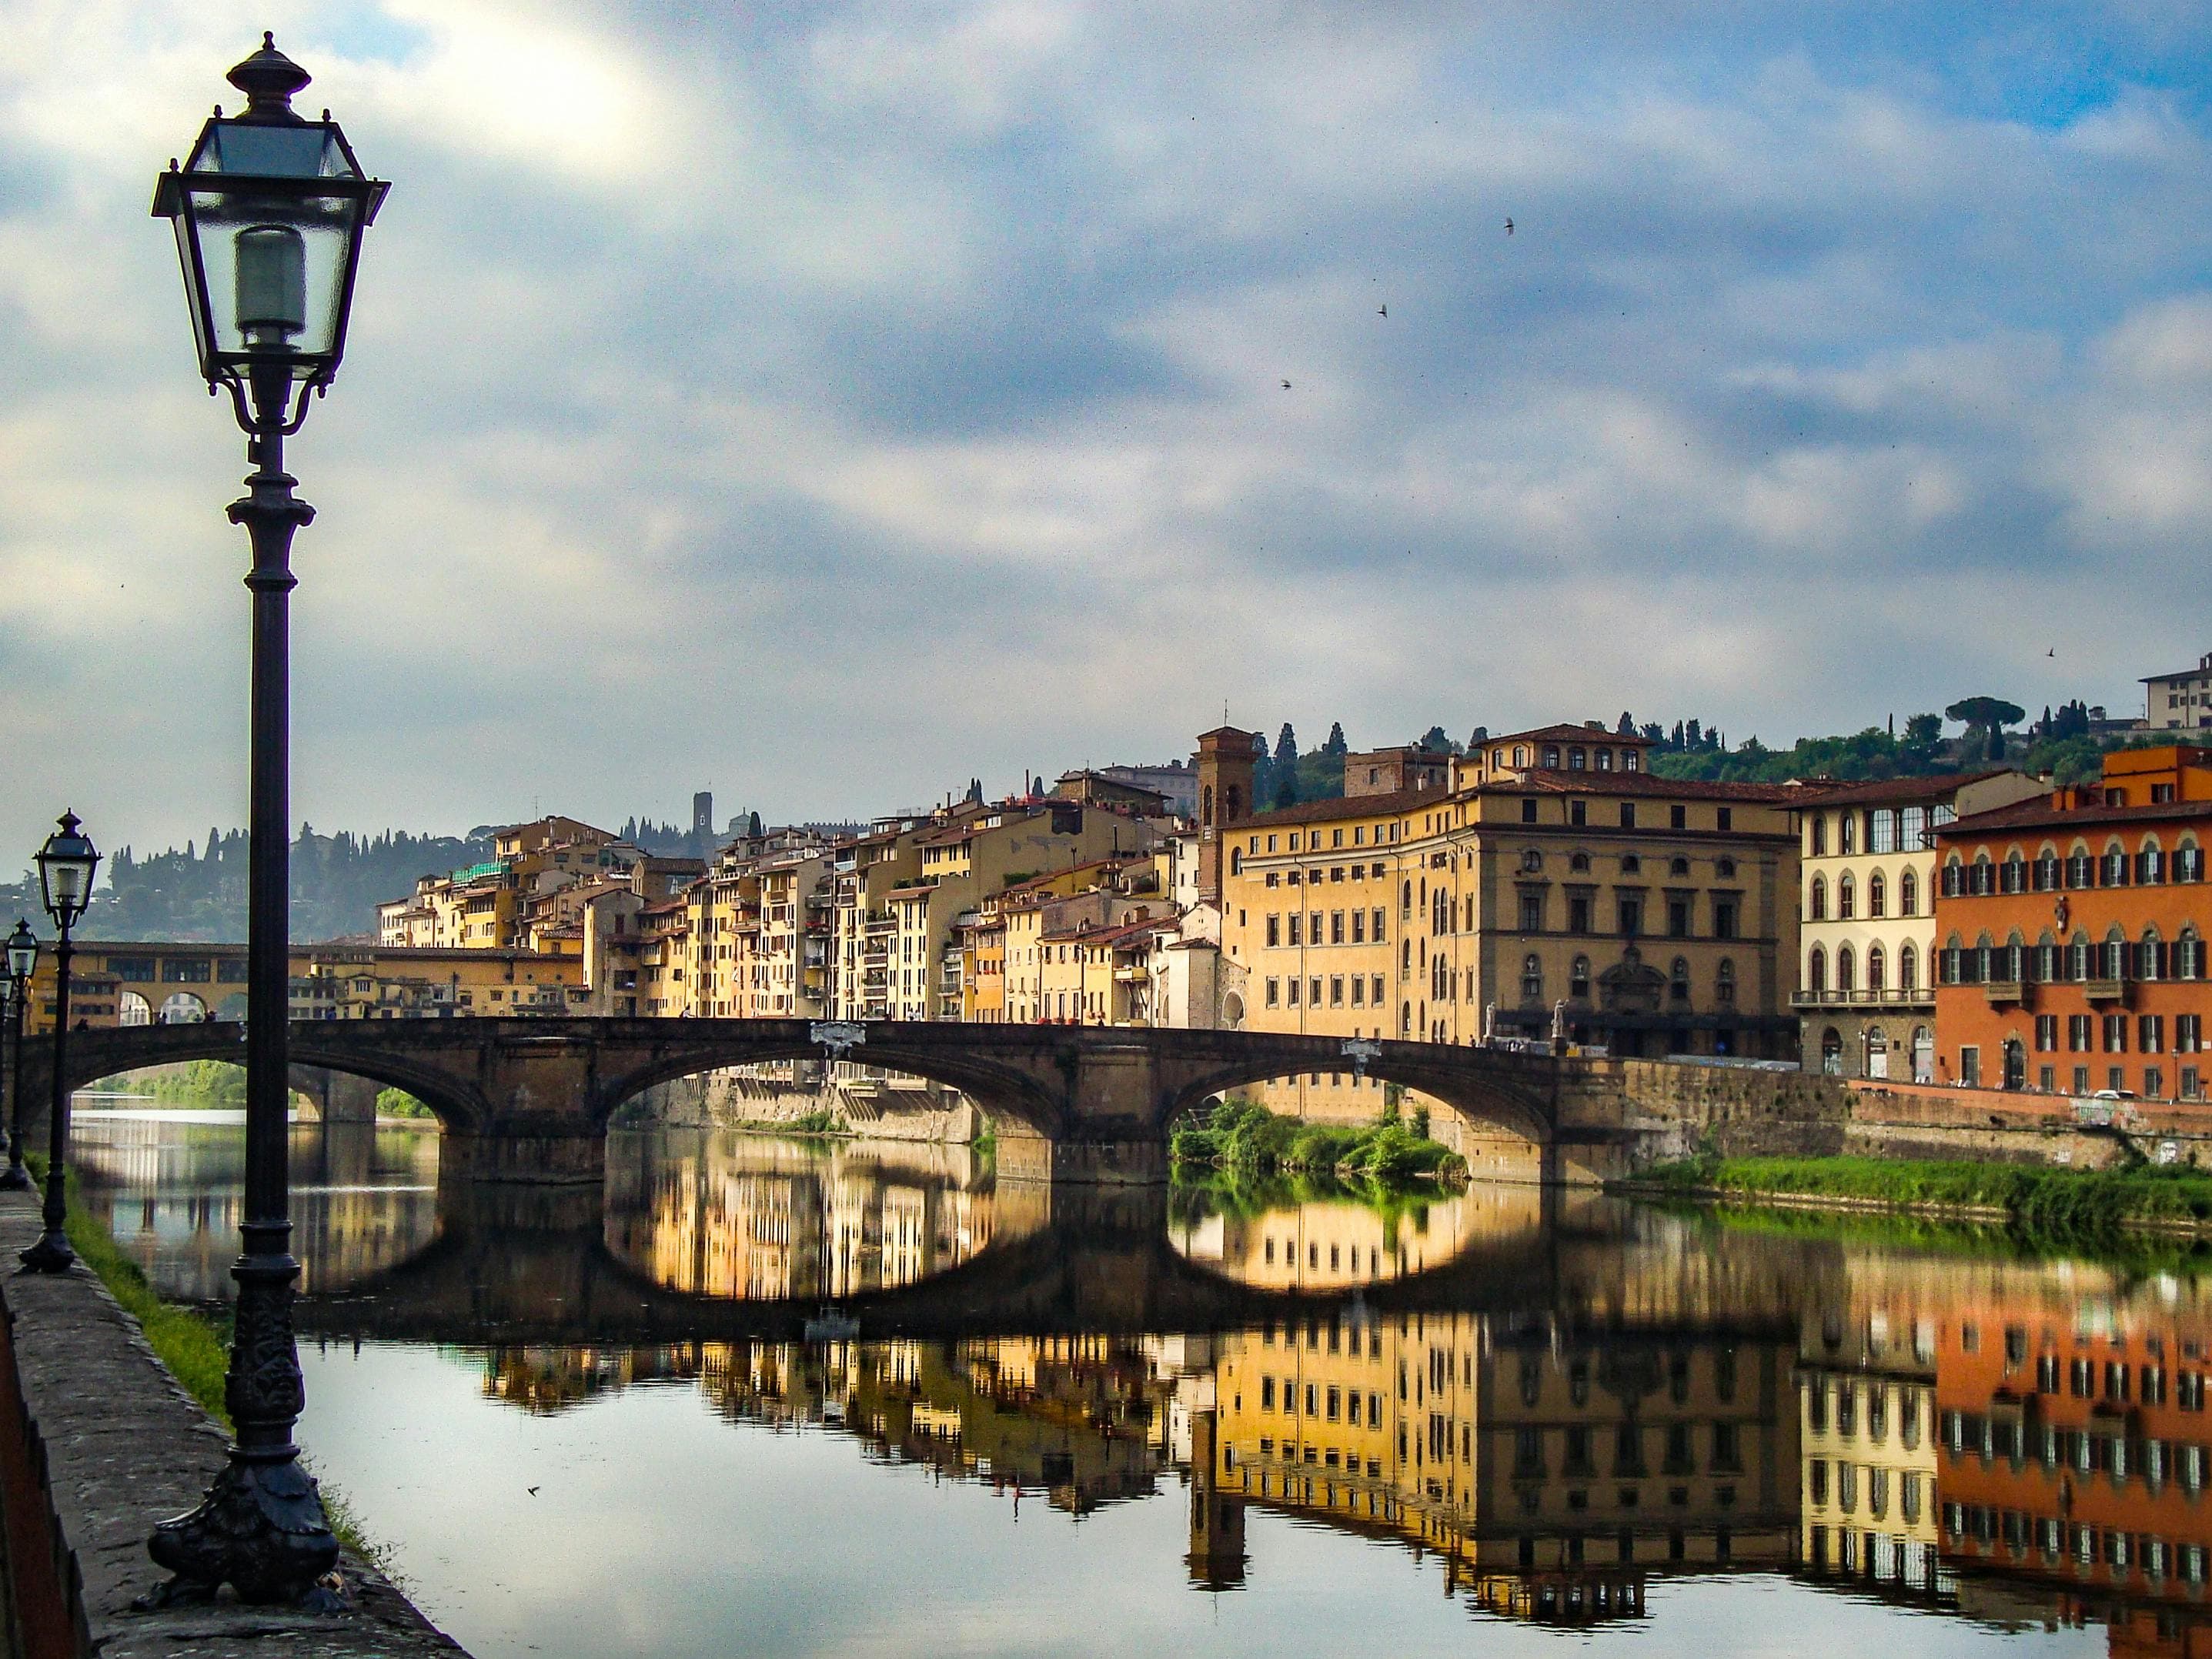 Fun  9 recommended fun tours, activities, tickets and more, in Rome and Florence, Italy.